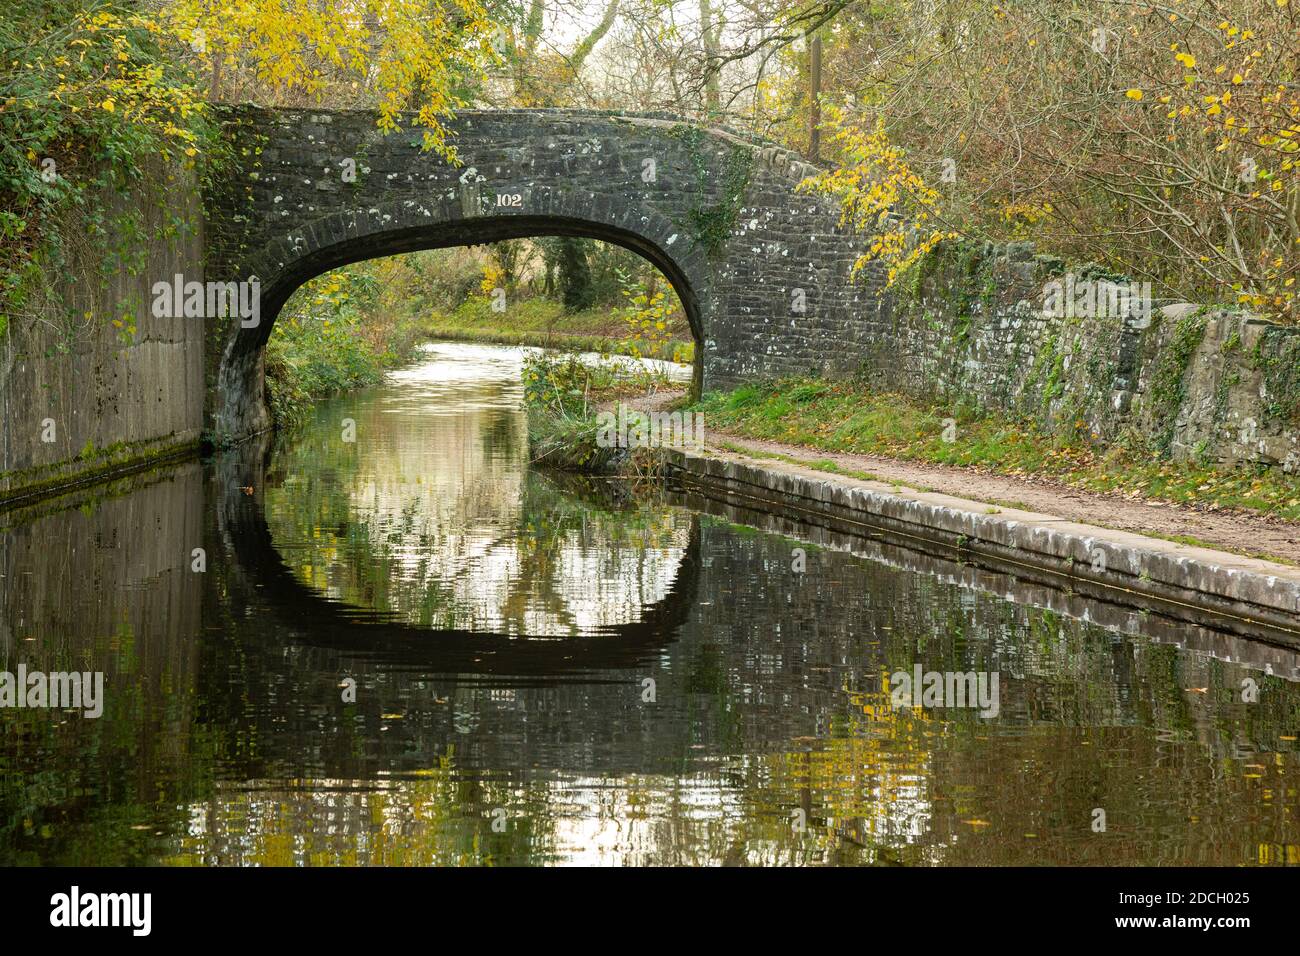 Bridge 102, near Llanfoist, Monmouthshire and Brecon Canal, Monmouthshire, Wales Stock Photo